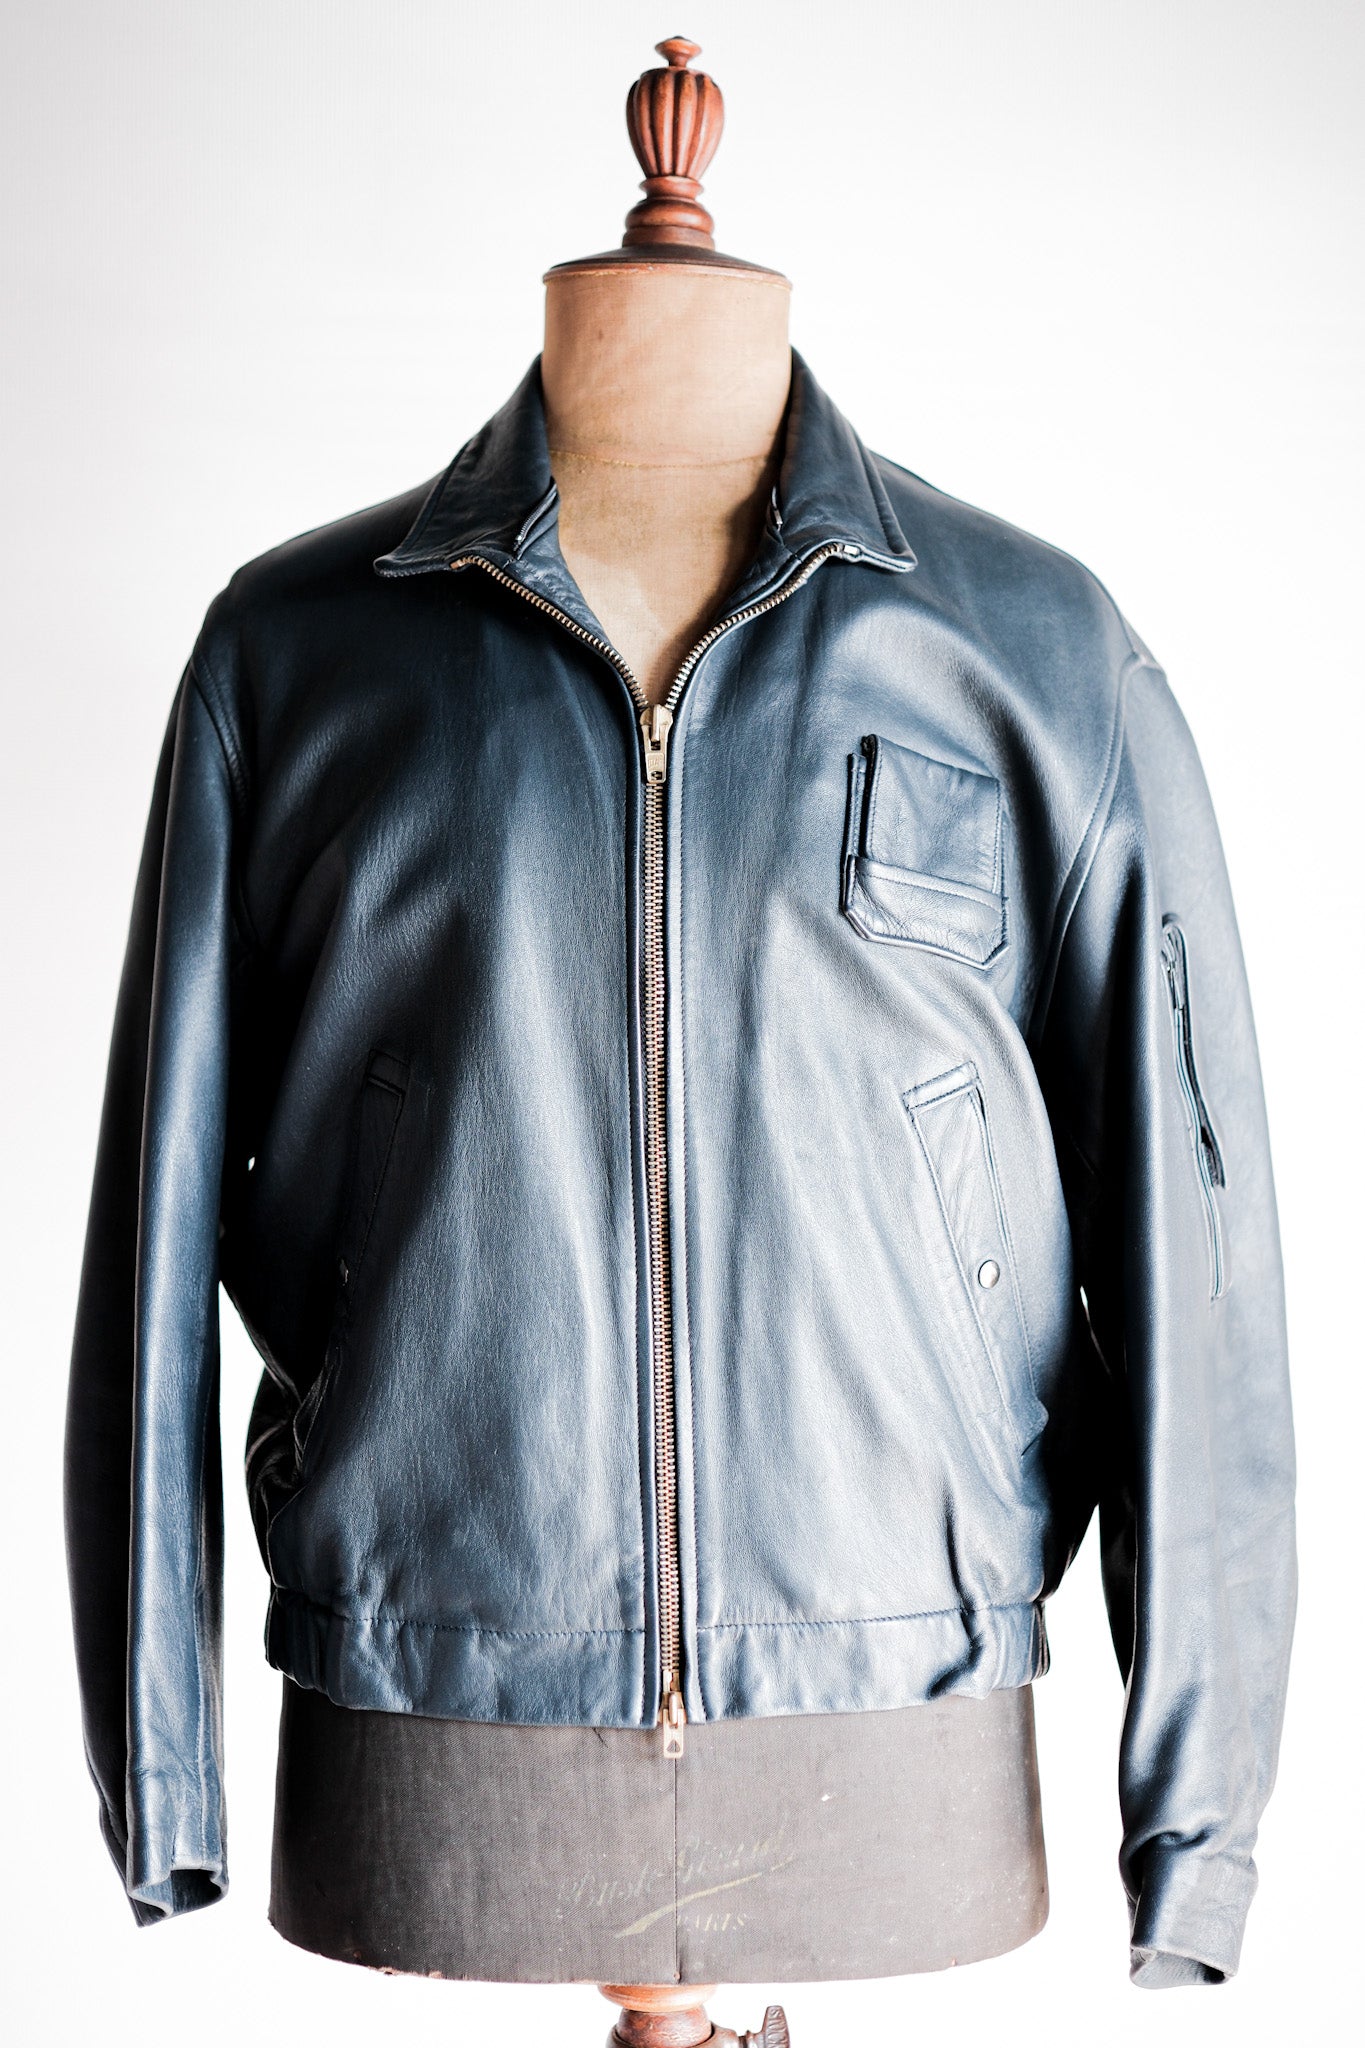 70's] French Air Force Pilot Leather Jacket with China Strap Size.9